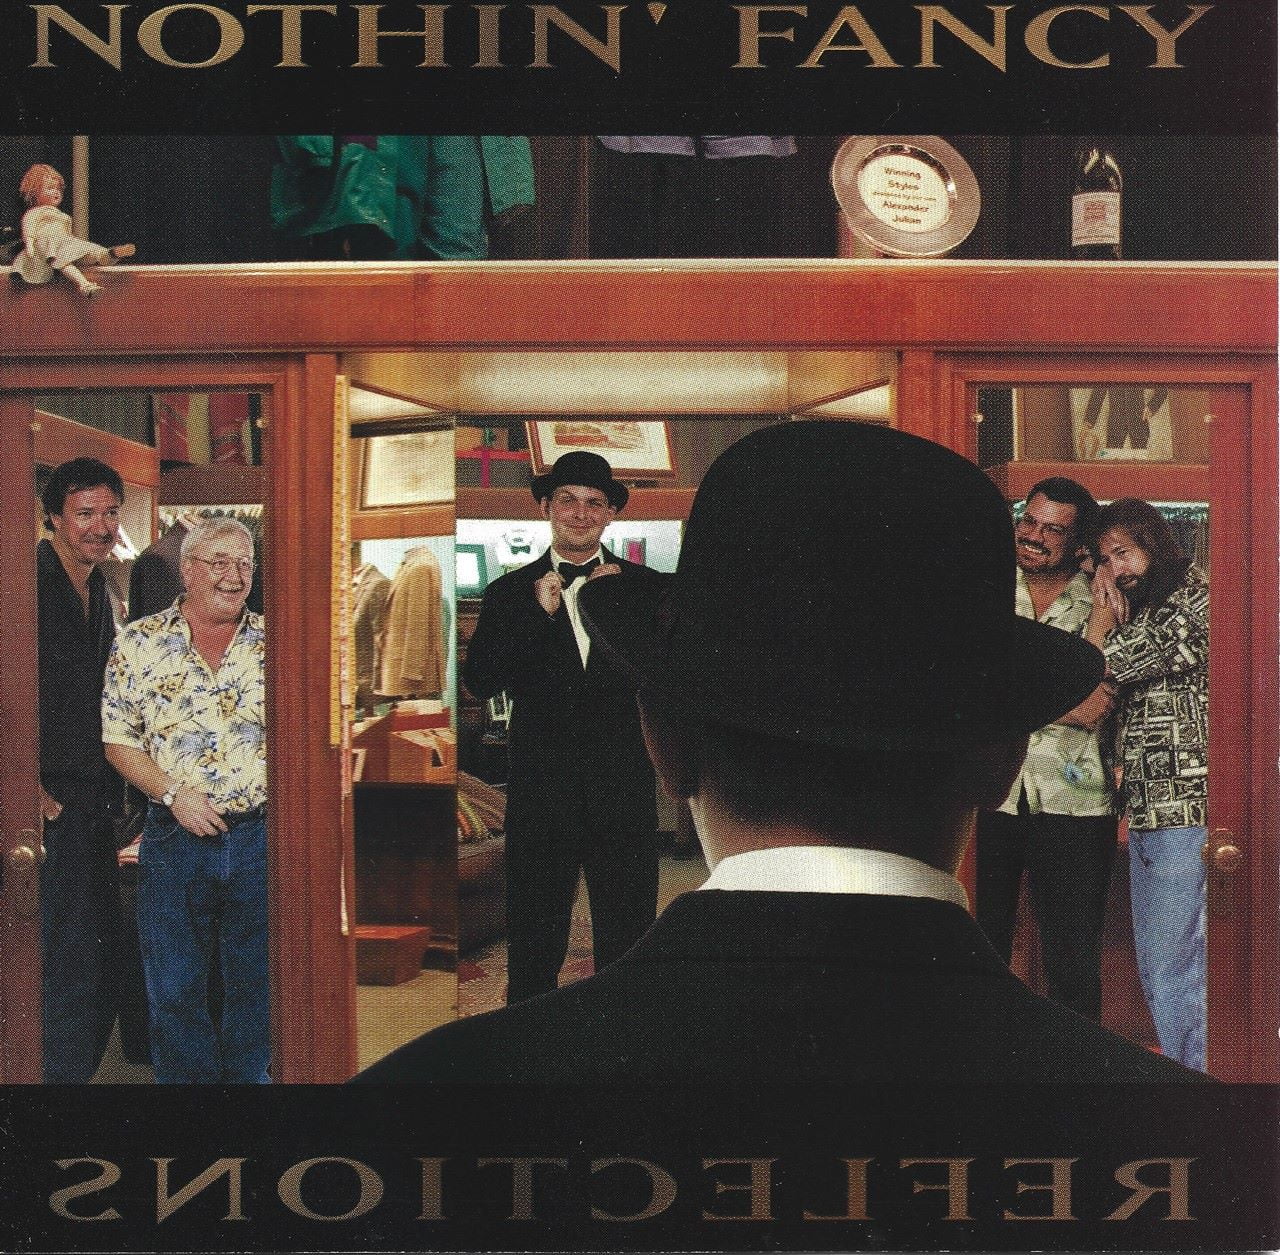 Nothin’ Fancy – Reflections cover album